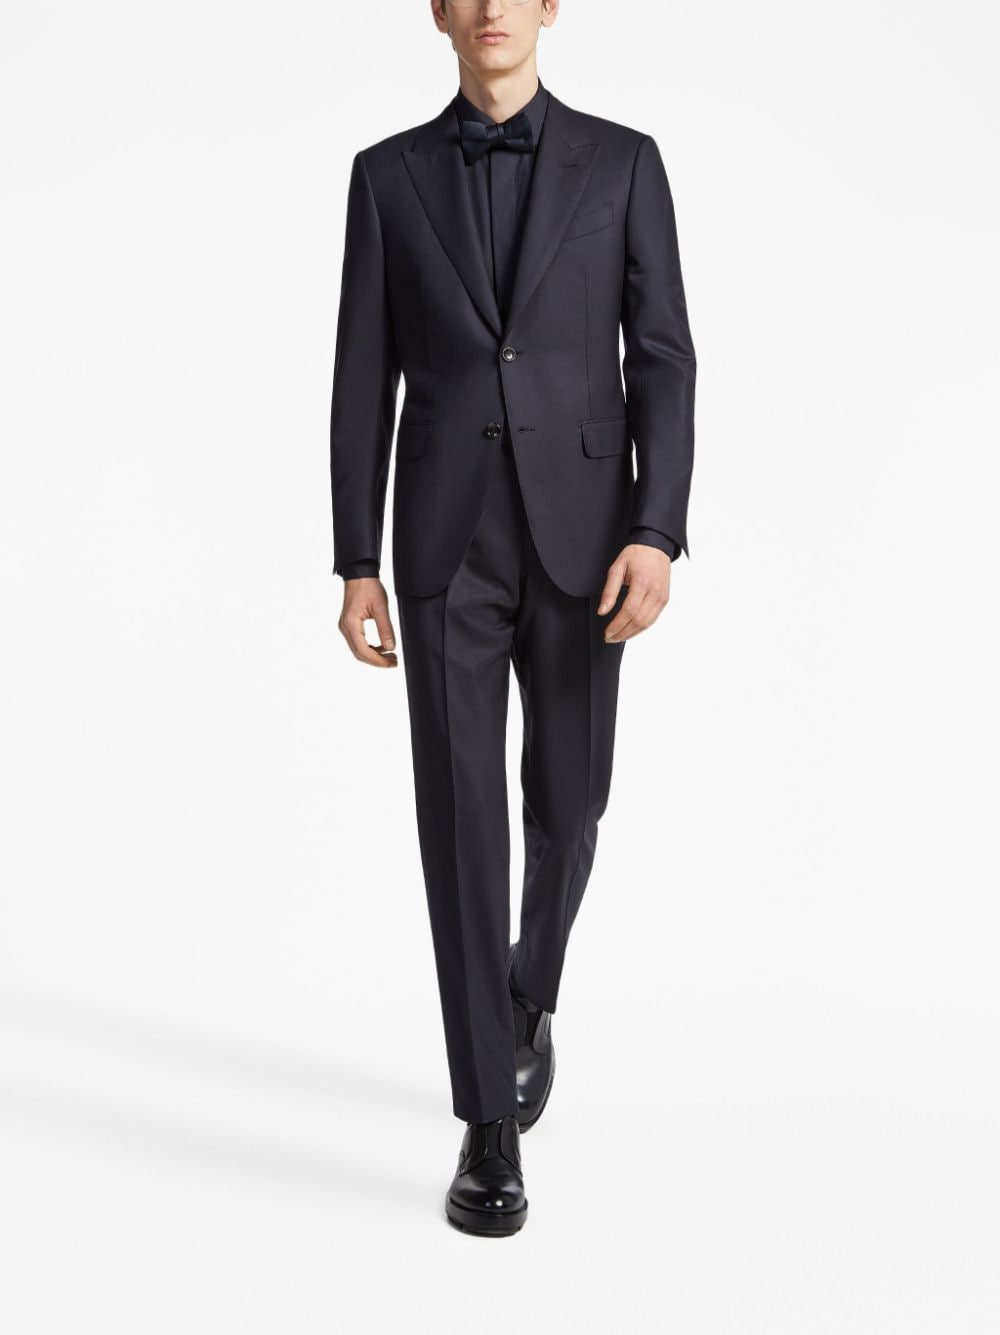 CENTOVENTIMILA SINGLE-BREASTED WOOL SUIT